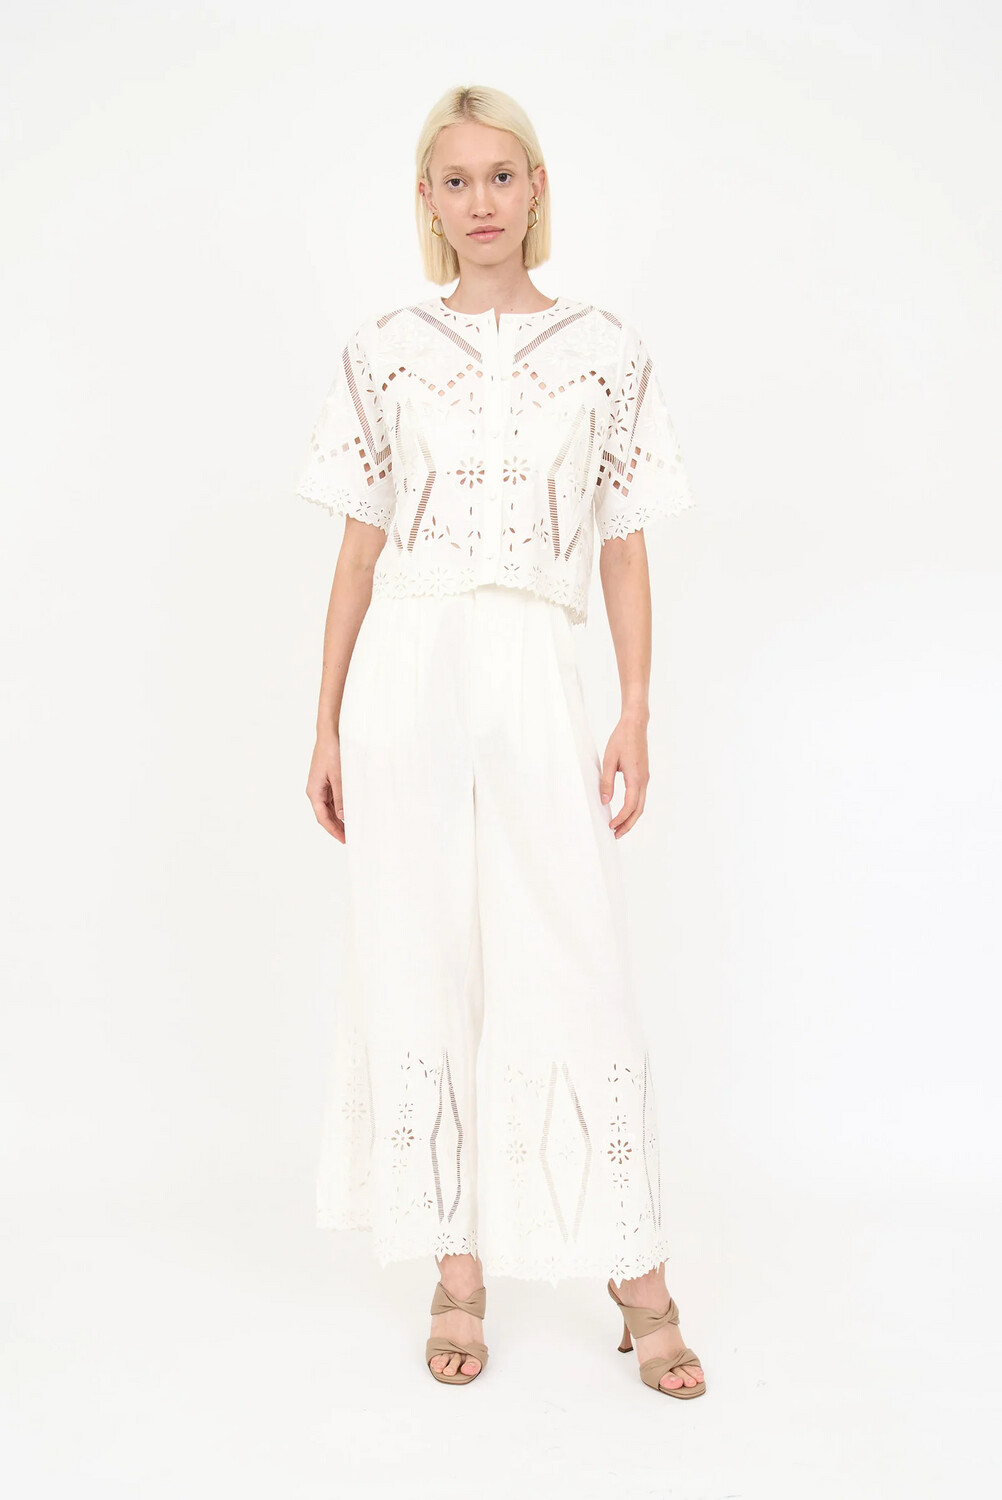 Christy Lynn Dylan Pant in Blanc Embroidery